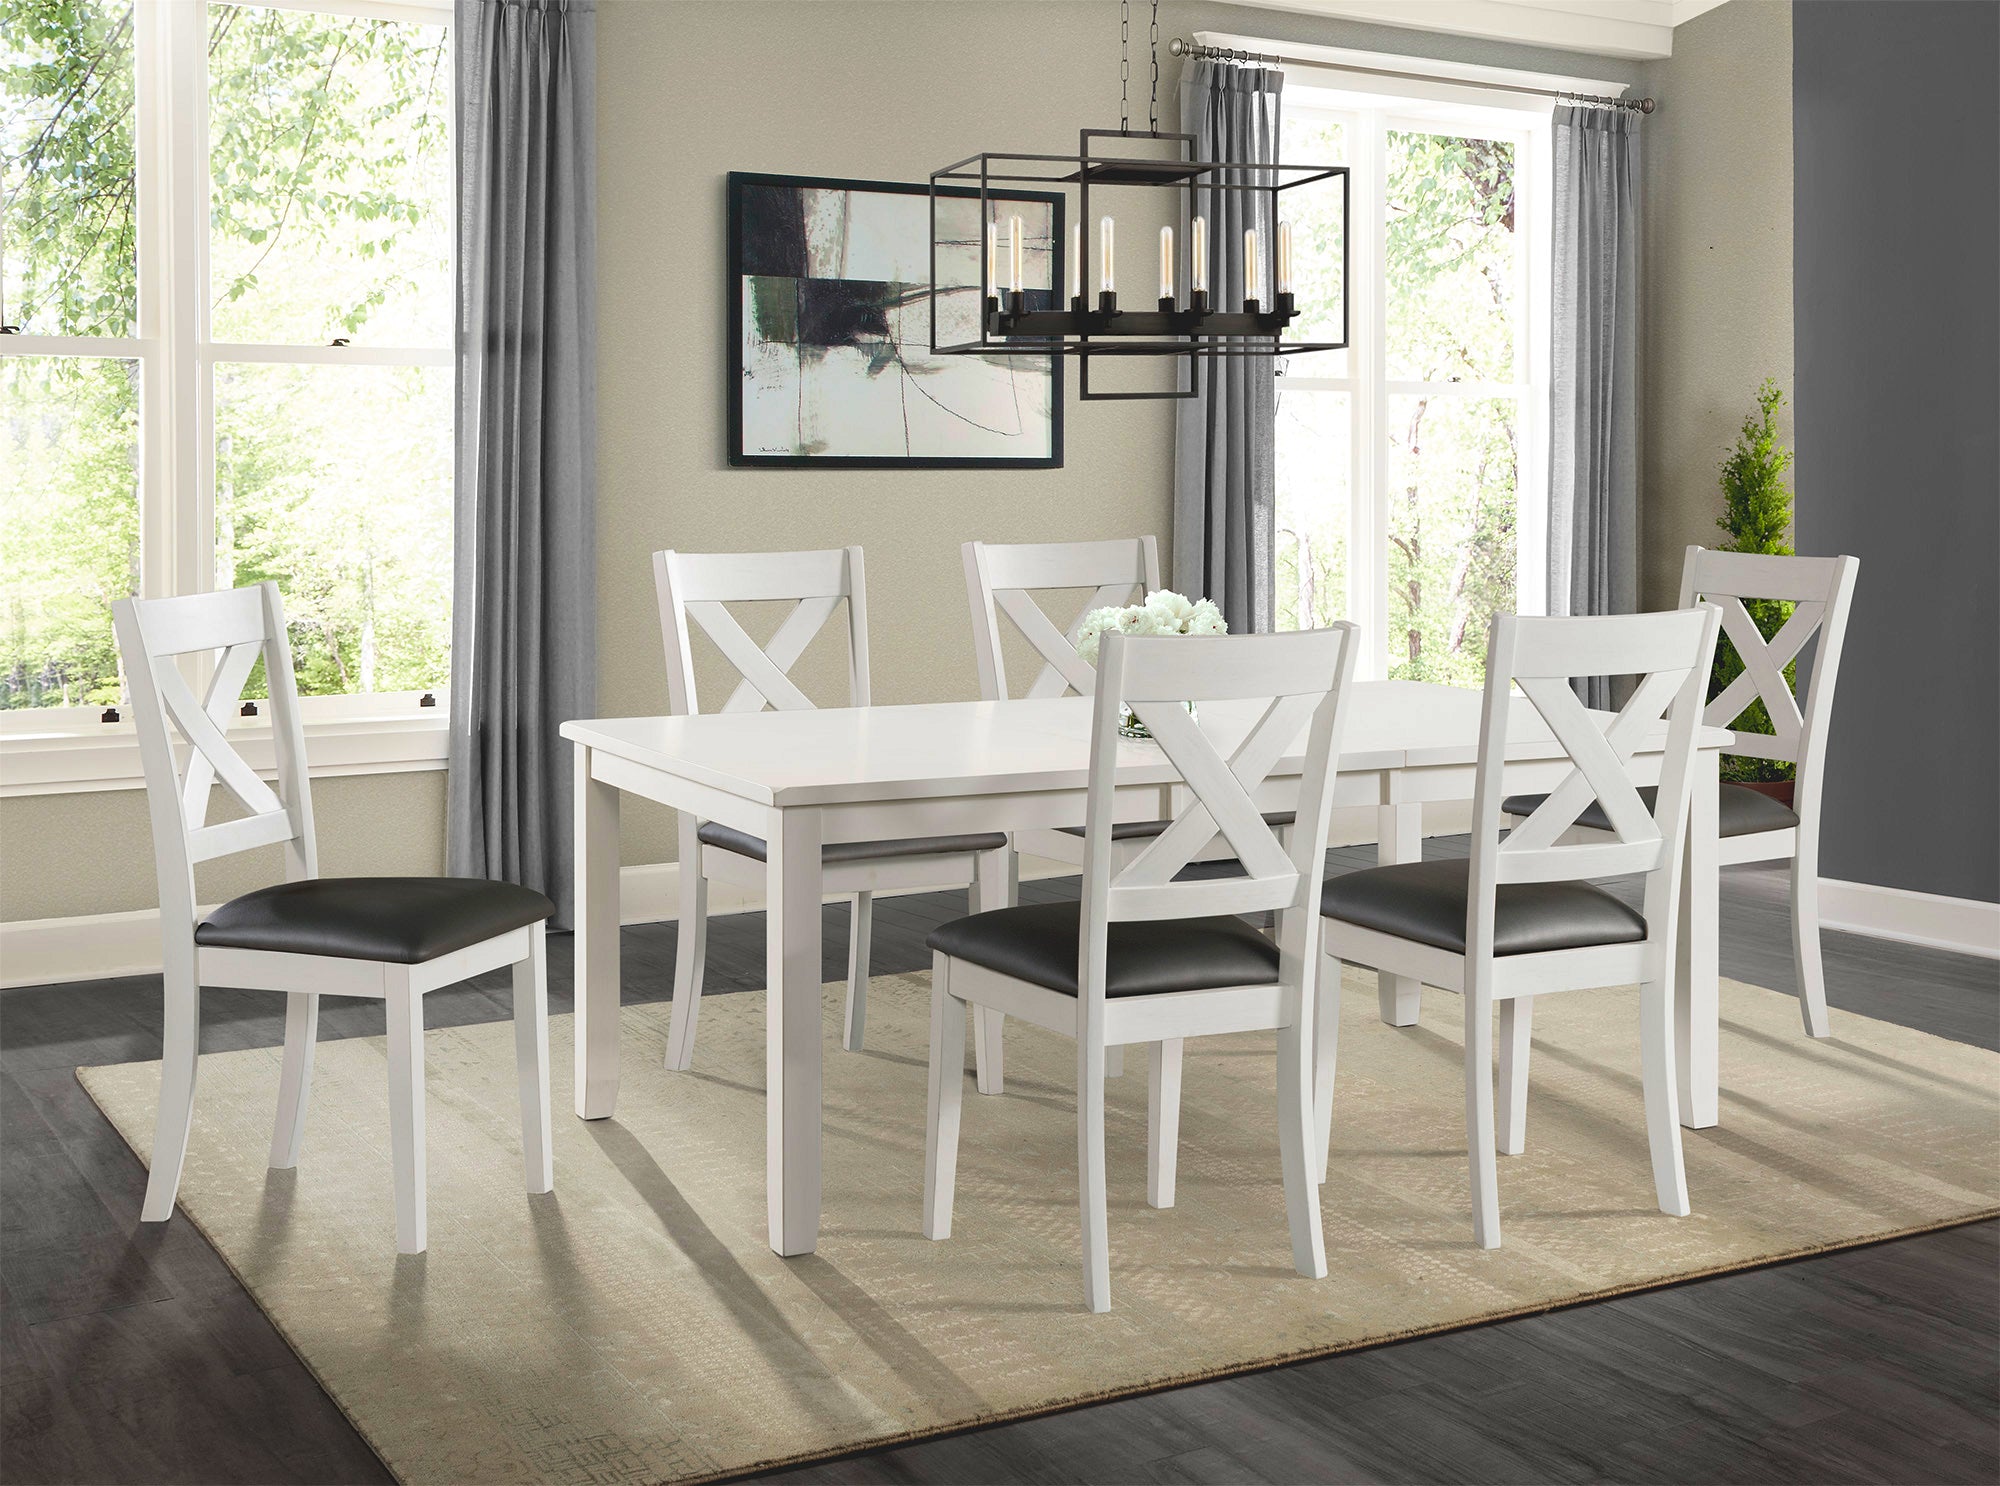 Rolex White 5 Piece Dining Set With X Back Chair Kanes Furniture